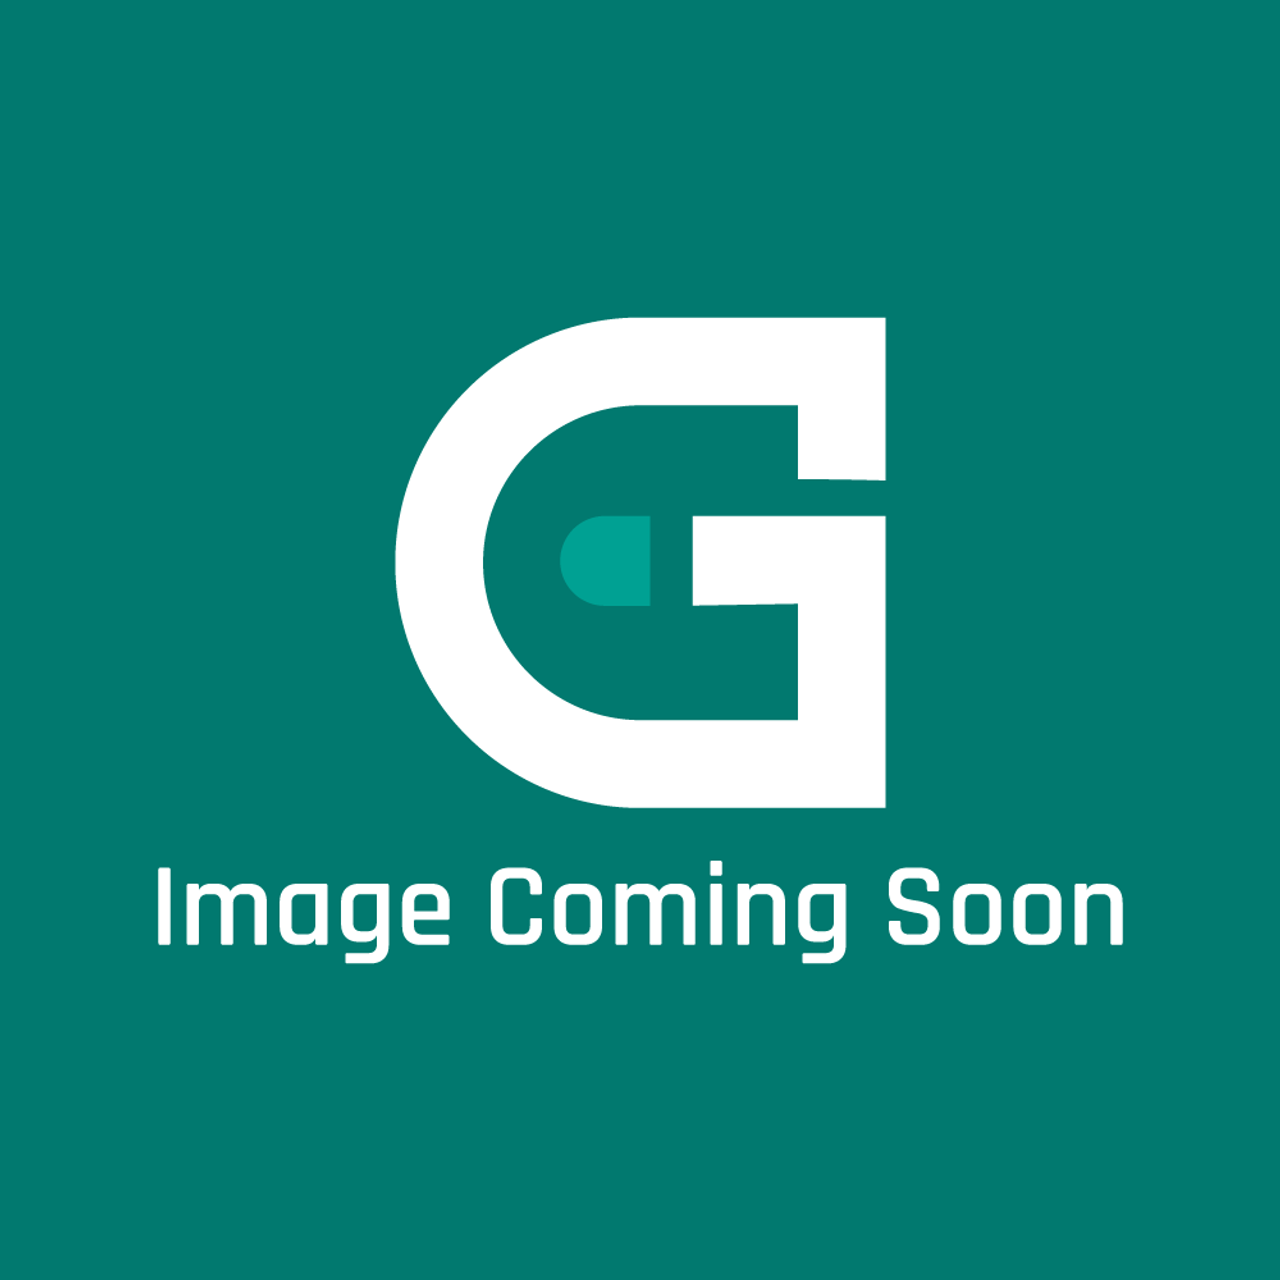 Frigidaire - Electrolux 316630007 Controller - Image Coming Soon!